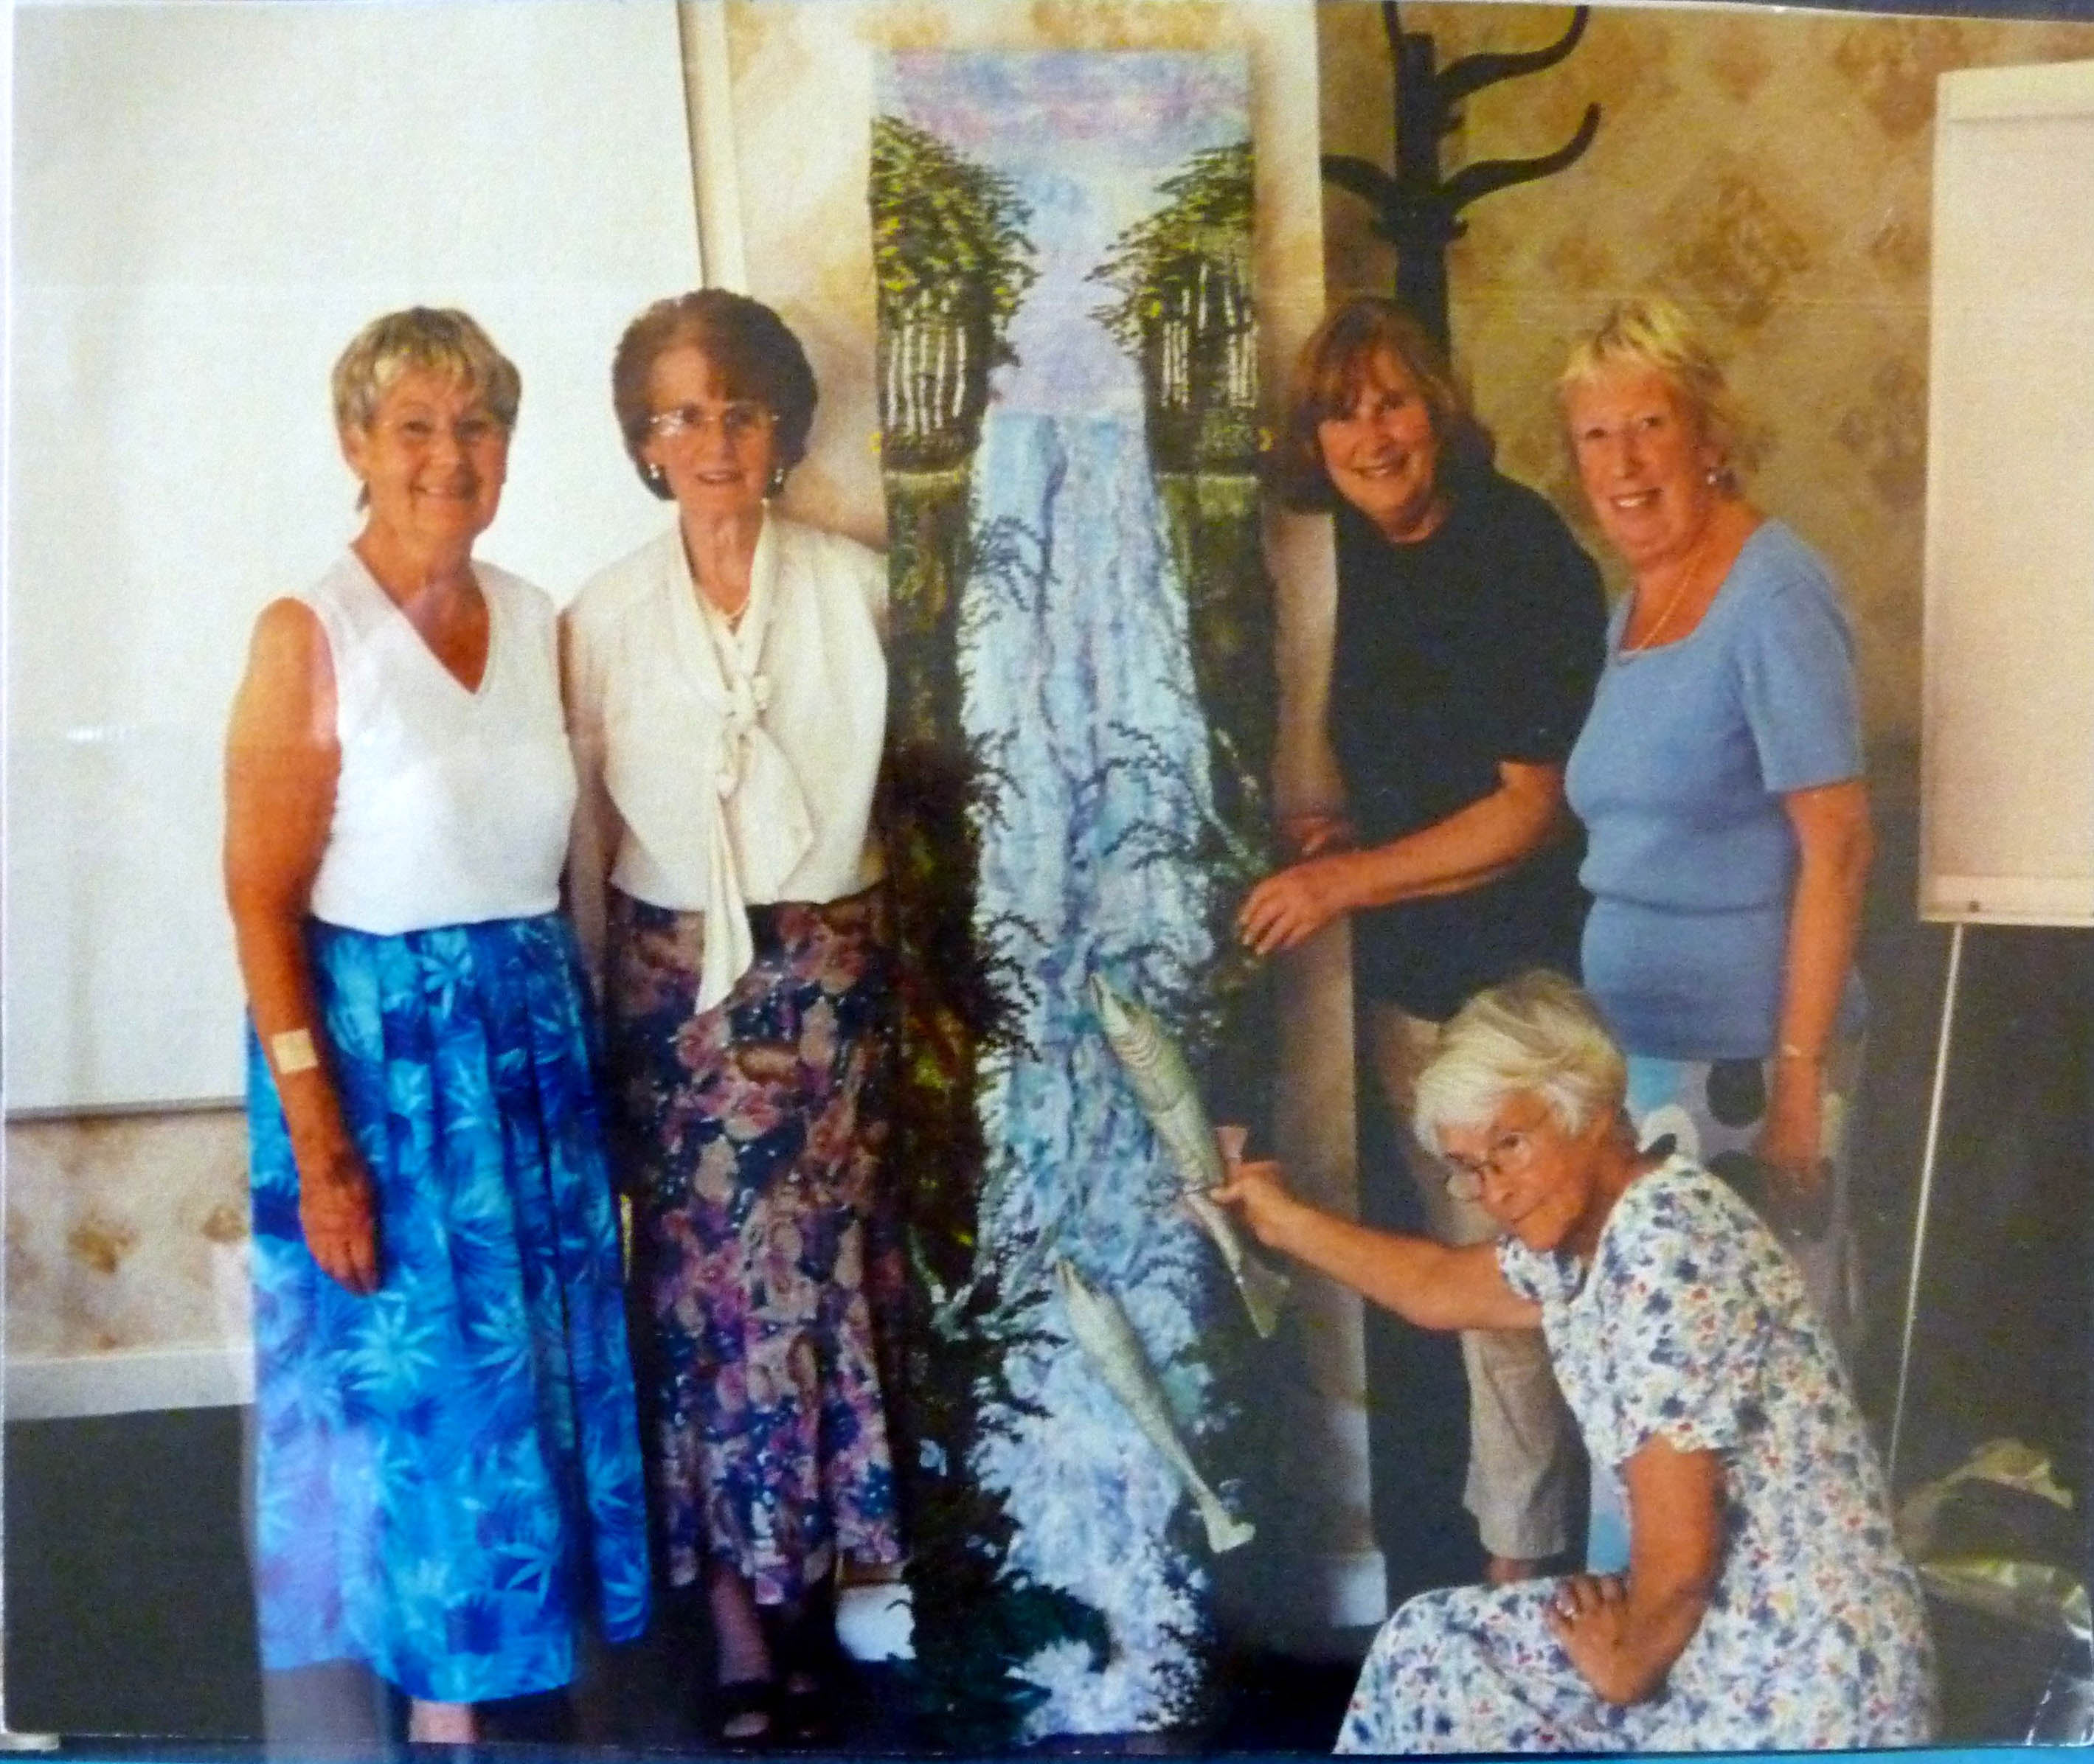 some members of Merseyside Embroiderers' Guild who worked on the WATERFALL PROJECT in Liverpool Women's Hospital